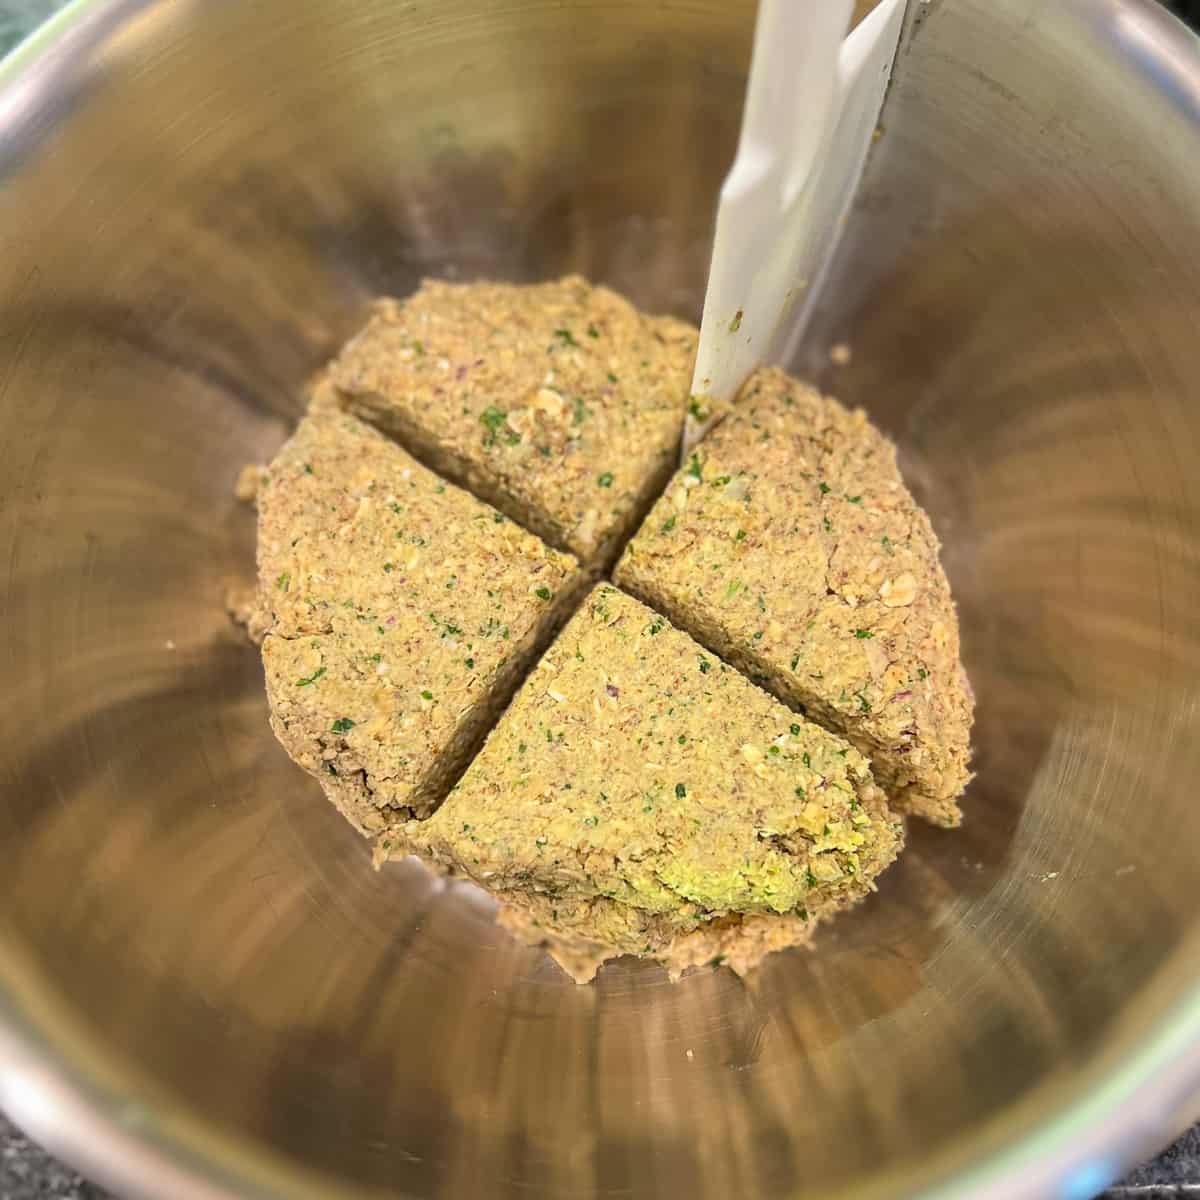 Chickpea patty mixture being divided into four parts.